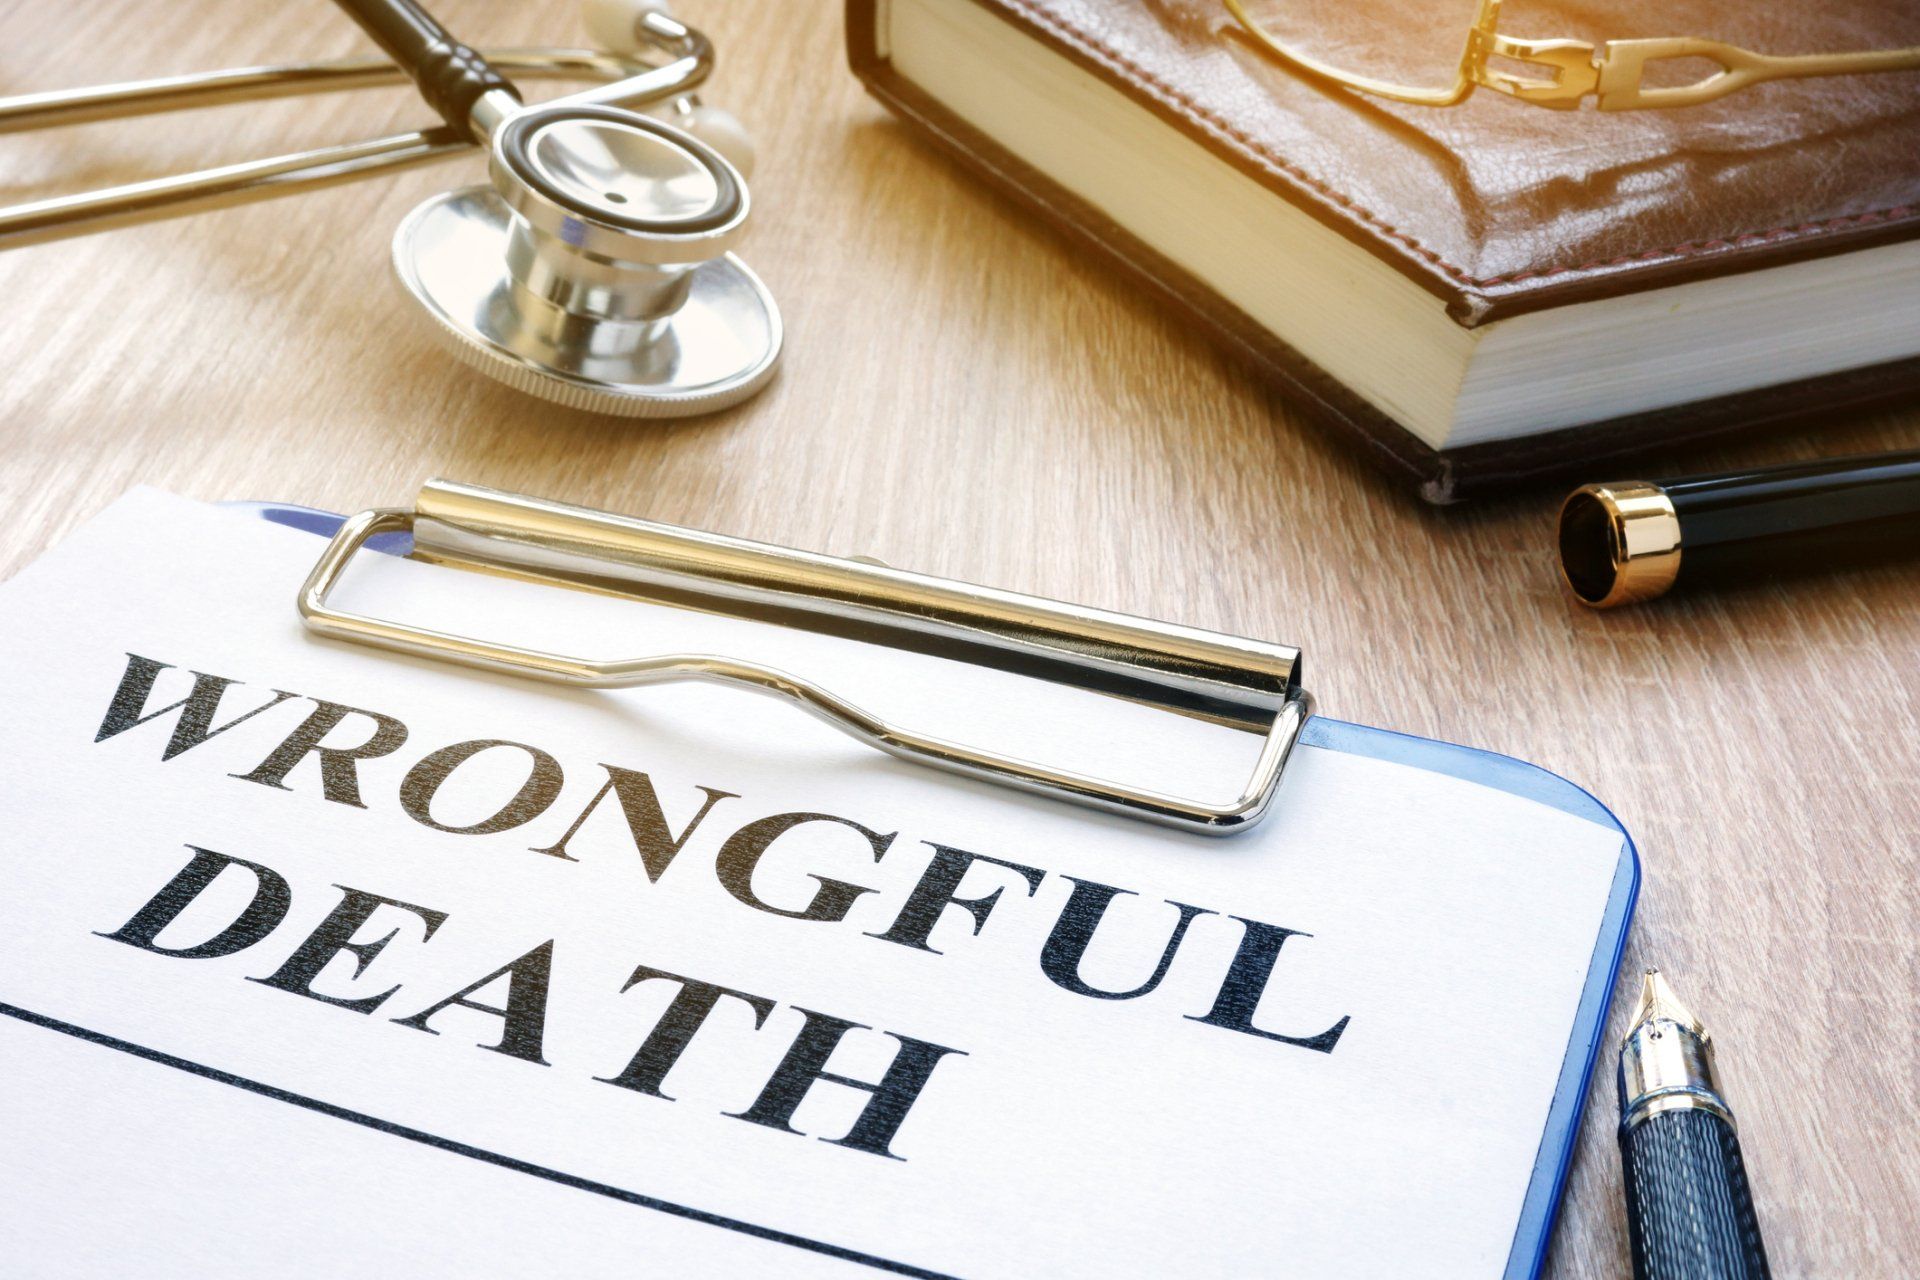 Wrongful Death/Lawsuits